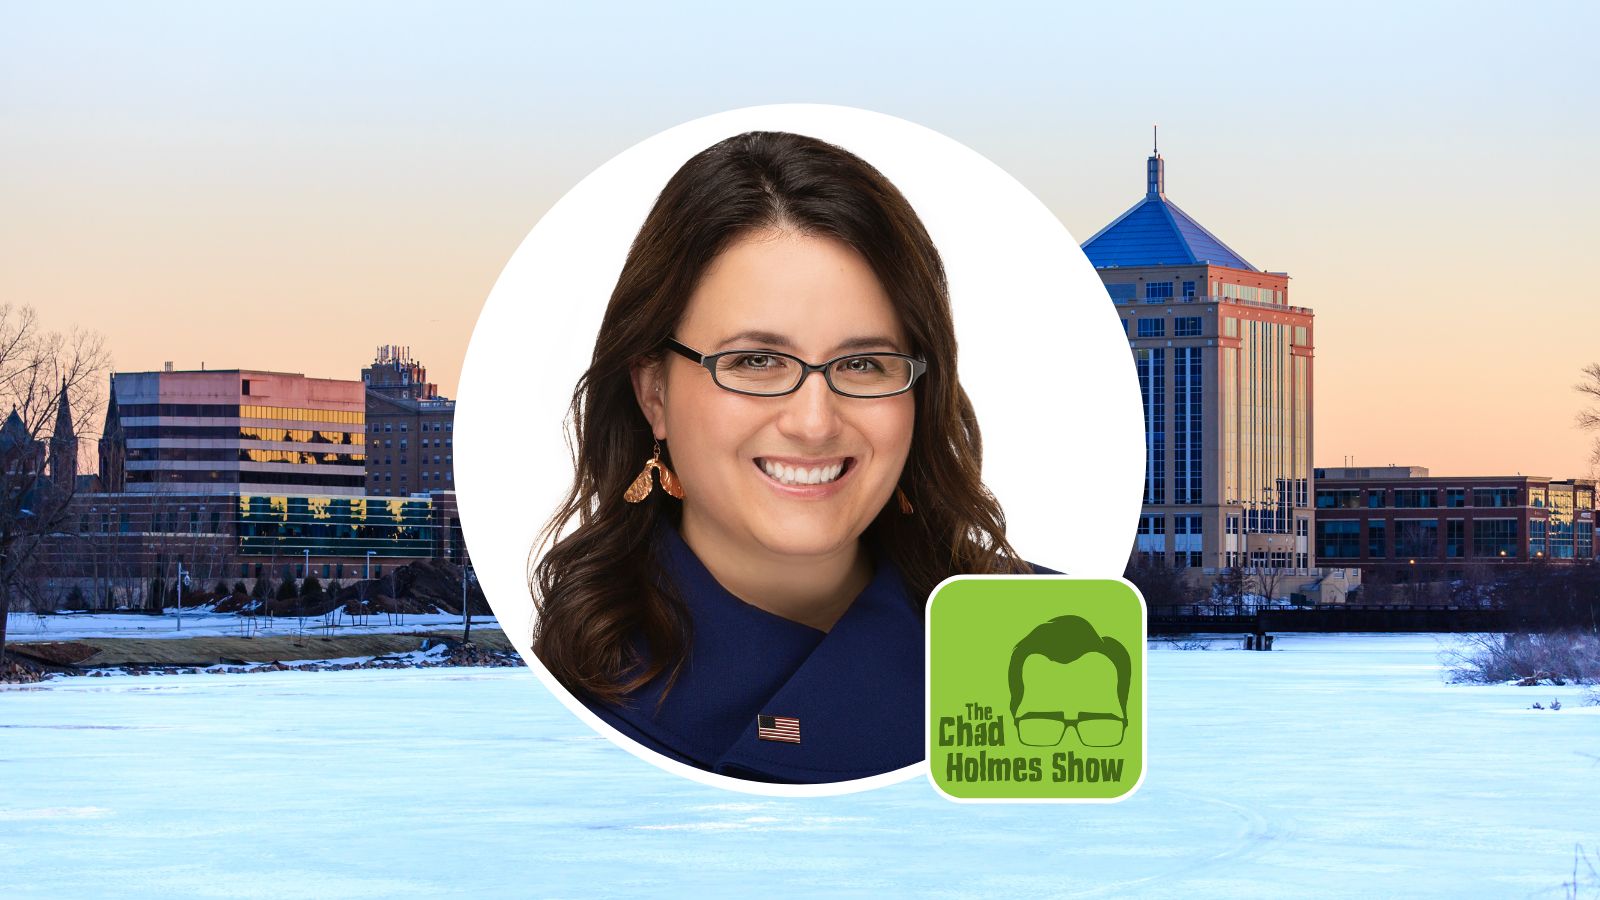 Building relationships that work: a discussion with Mayor Katie Rosenberg